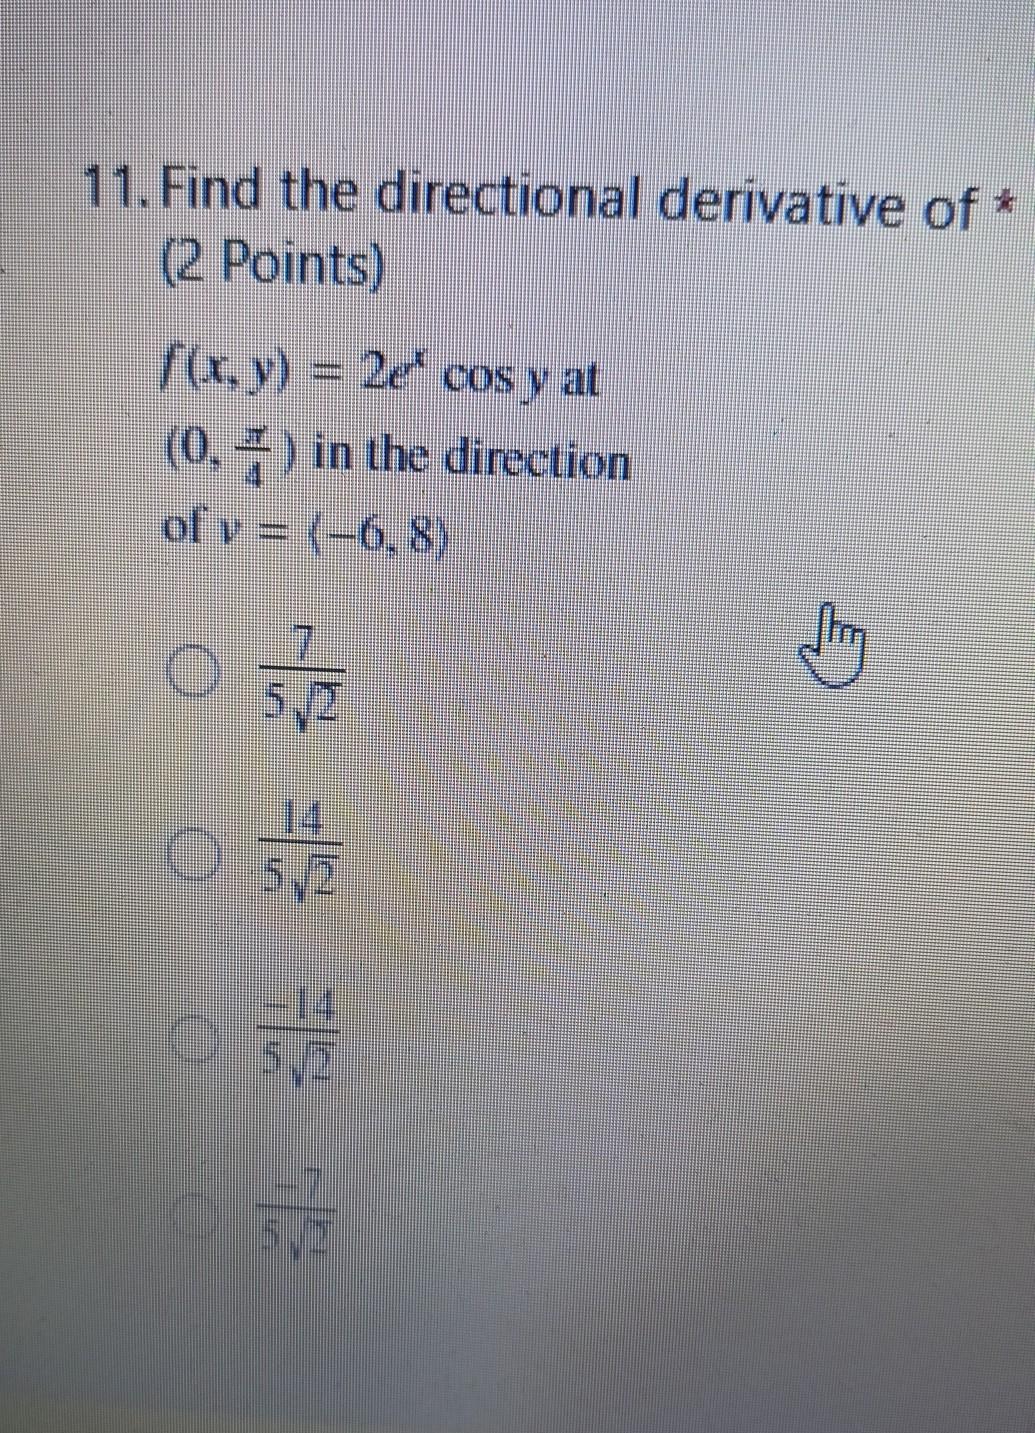 11 Find The Directional Derivative Of 2 Points X Y 2e Cos Y At 0 1 In The Direction Of V 6 8 0572 7 5 1